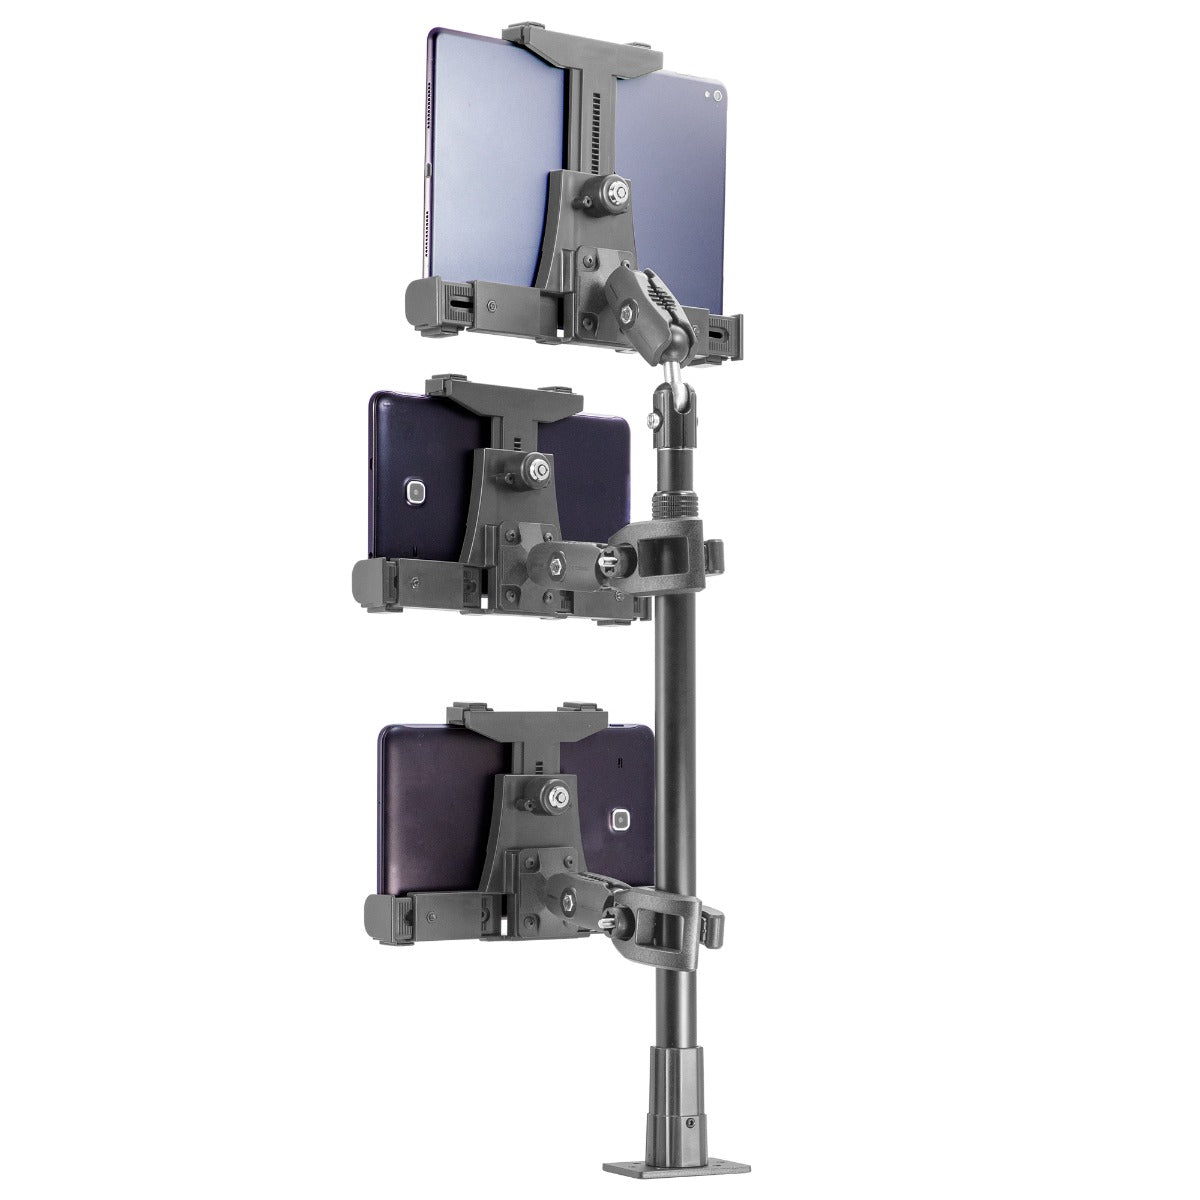 iBOLT Tablet Tower- Dock’n Lock POS Locking Drill Base Mount - with 3 Tablet Holders